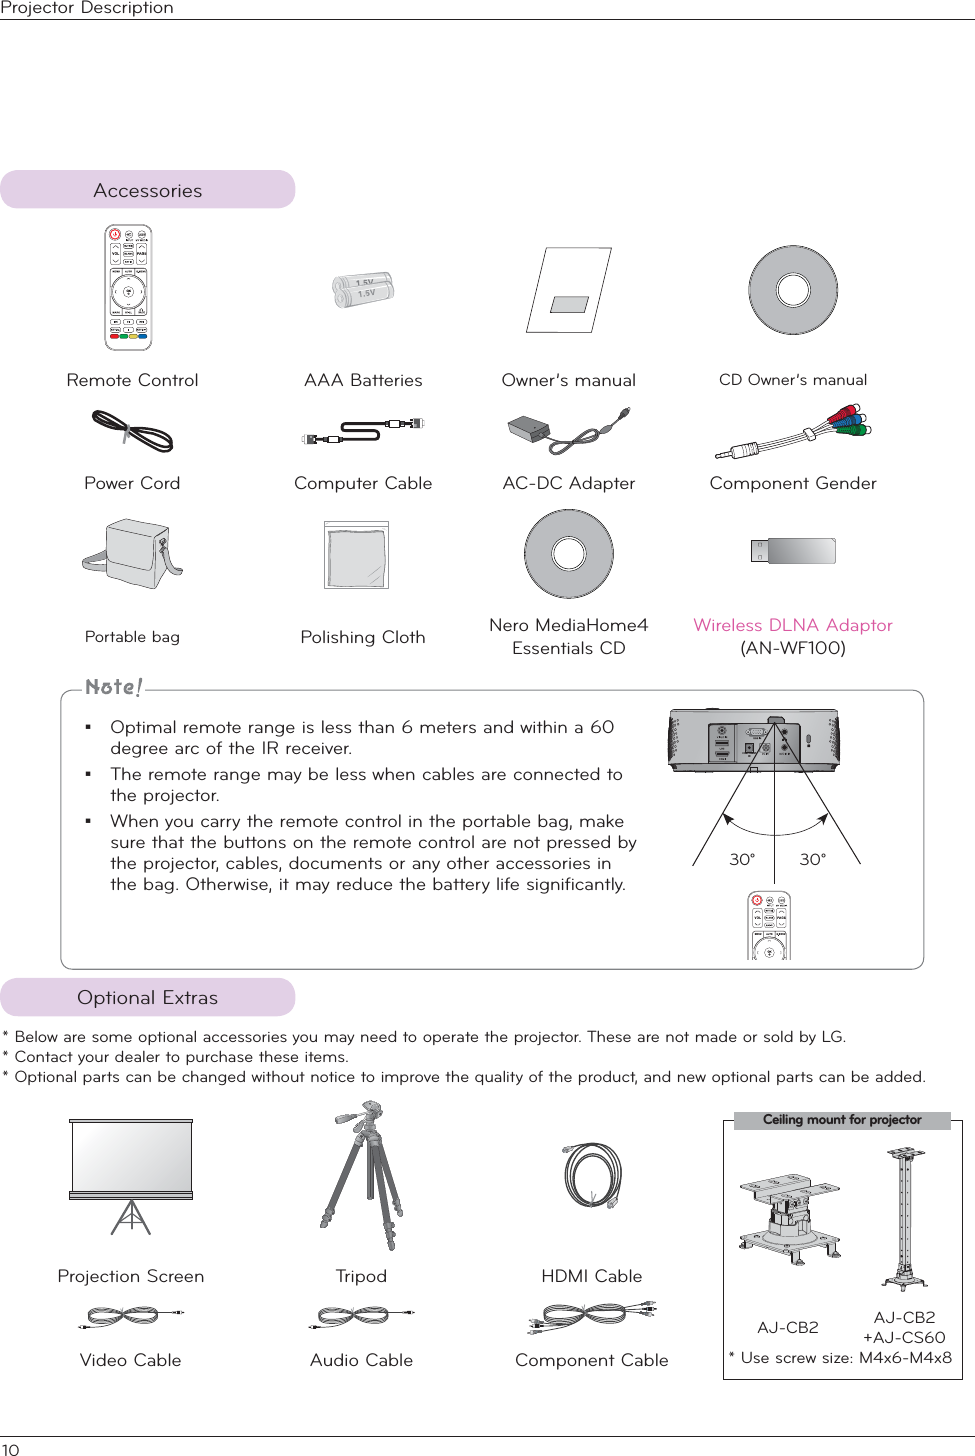 10AccessoriesOptional Extras * Below are some optional accessories you may need to operate the projector. These are not made or sold by LG.* Contact your dealer to purchase these items.* Optional parts can be changed without notice to improve the quality of the product, and new optional parts can be added. ƒ Optimal remote range is less than 6 meters and within a 60 degree arc of the IR receiver. ƒ The remote range may be less when cables are connected to the projector. ƒ When you carry the remote control in the portable bag, make sure that the buttons on the remote control are not pressed by the projector, cables, documents or any other accessories in the bag. Otherwise, it may reduce the battery life significantly.COMPONENTINRemote Control AAA Batteries Owner’s manual CD Owner’s manualPower Cord Computer Cable AC-DC Adapter Component GenderPortable bag Polishing Cloth Nero MediaHome4 Essentials CDWireless DLNA Adaptor(AN-WF100)Projection Screen Tripod HDMI CableVideo Cable Audio Cable Component Cable30°        30°Ceiling mount for projectorAJ-CB2 AJ-CB2 +AJ-CS60* Use screw size: M4x6-M4x8 Projector Description